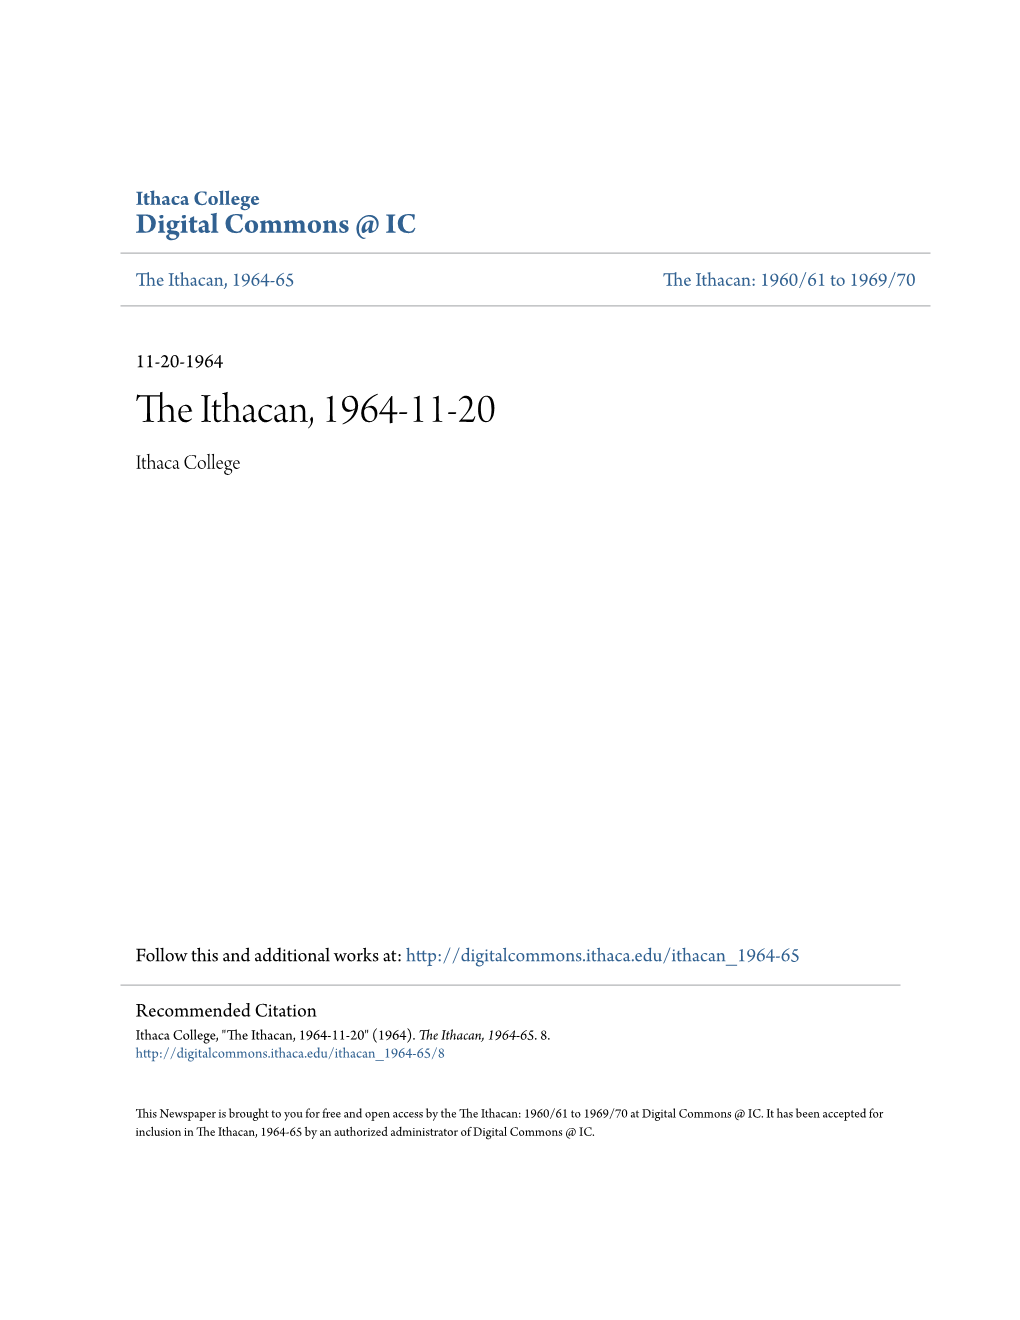 The Ithacan, 1964-11-20